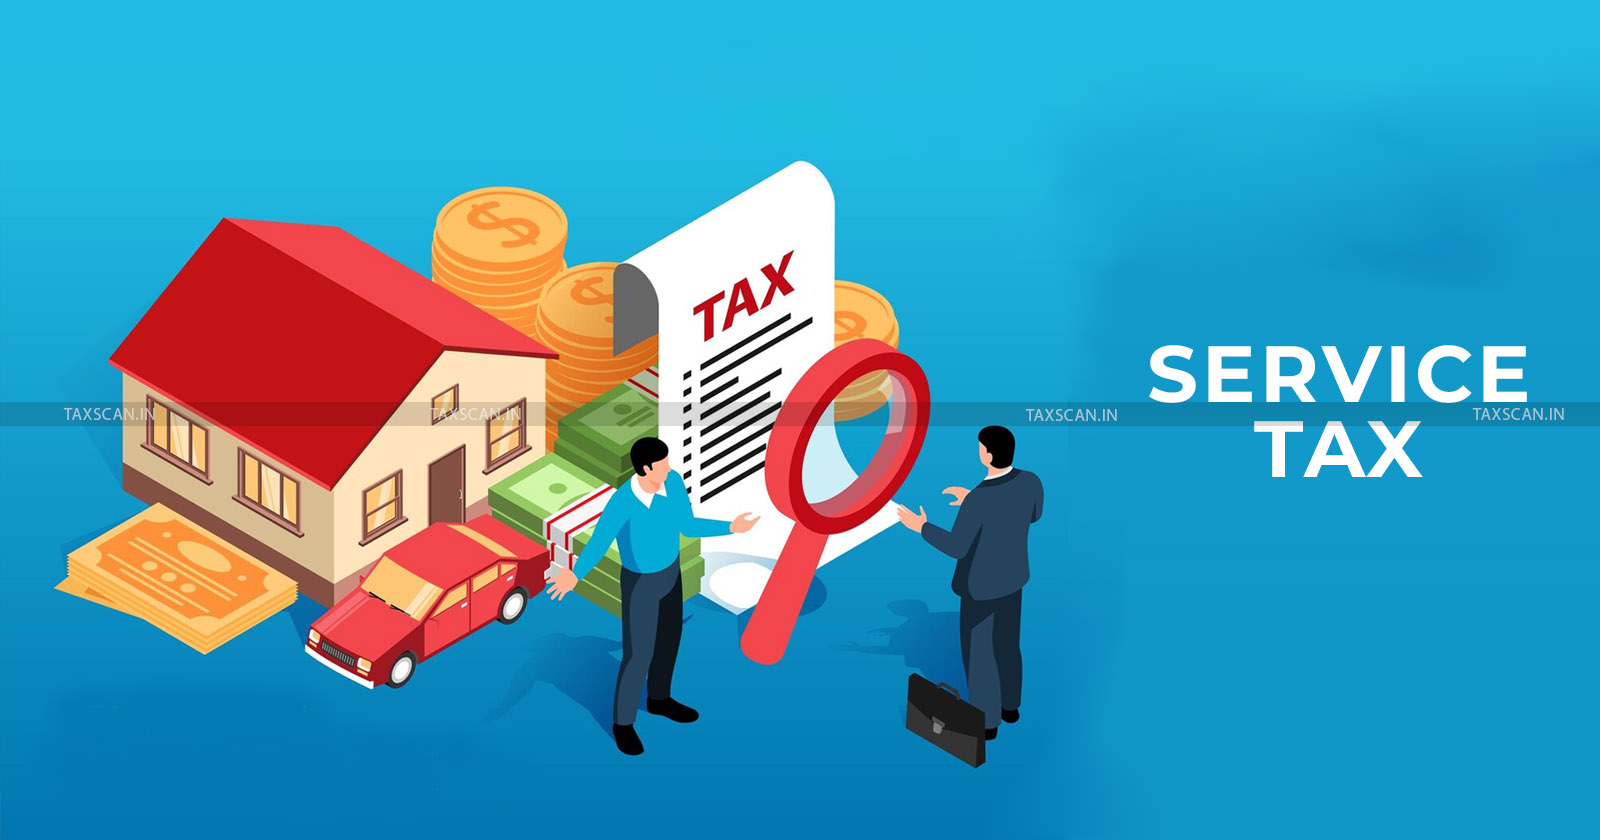 Kerala High court - Mandatory Deposit - Service Tax - Commissioner of Central Excise - Central Excise Act - taxscan